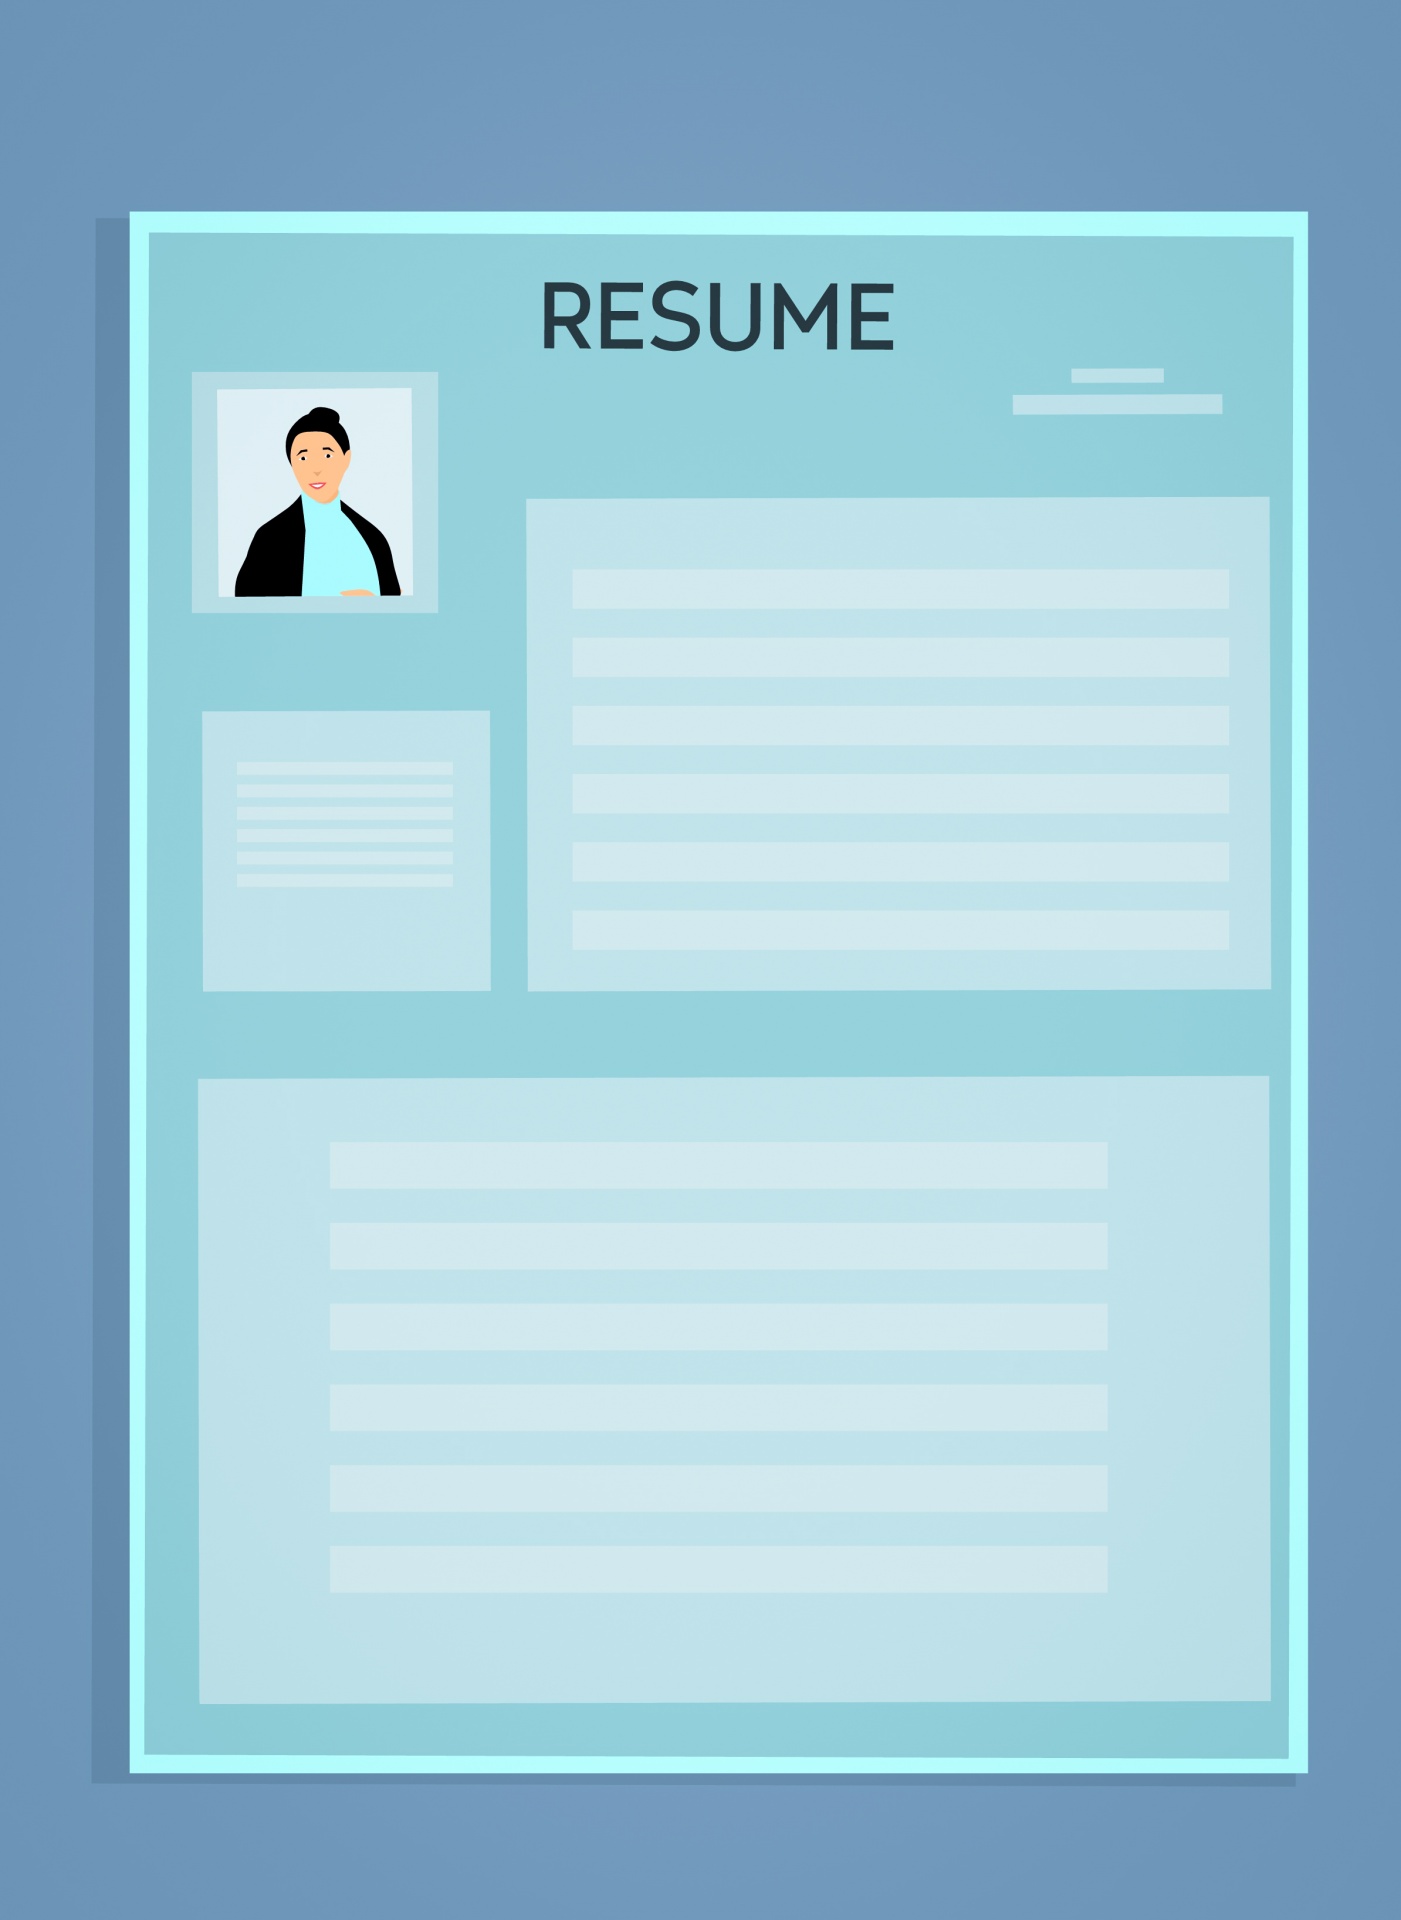 resume-cv-resume-template-free-stock-photo-public-domain-pictures